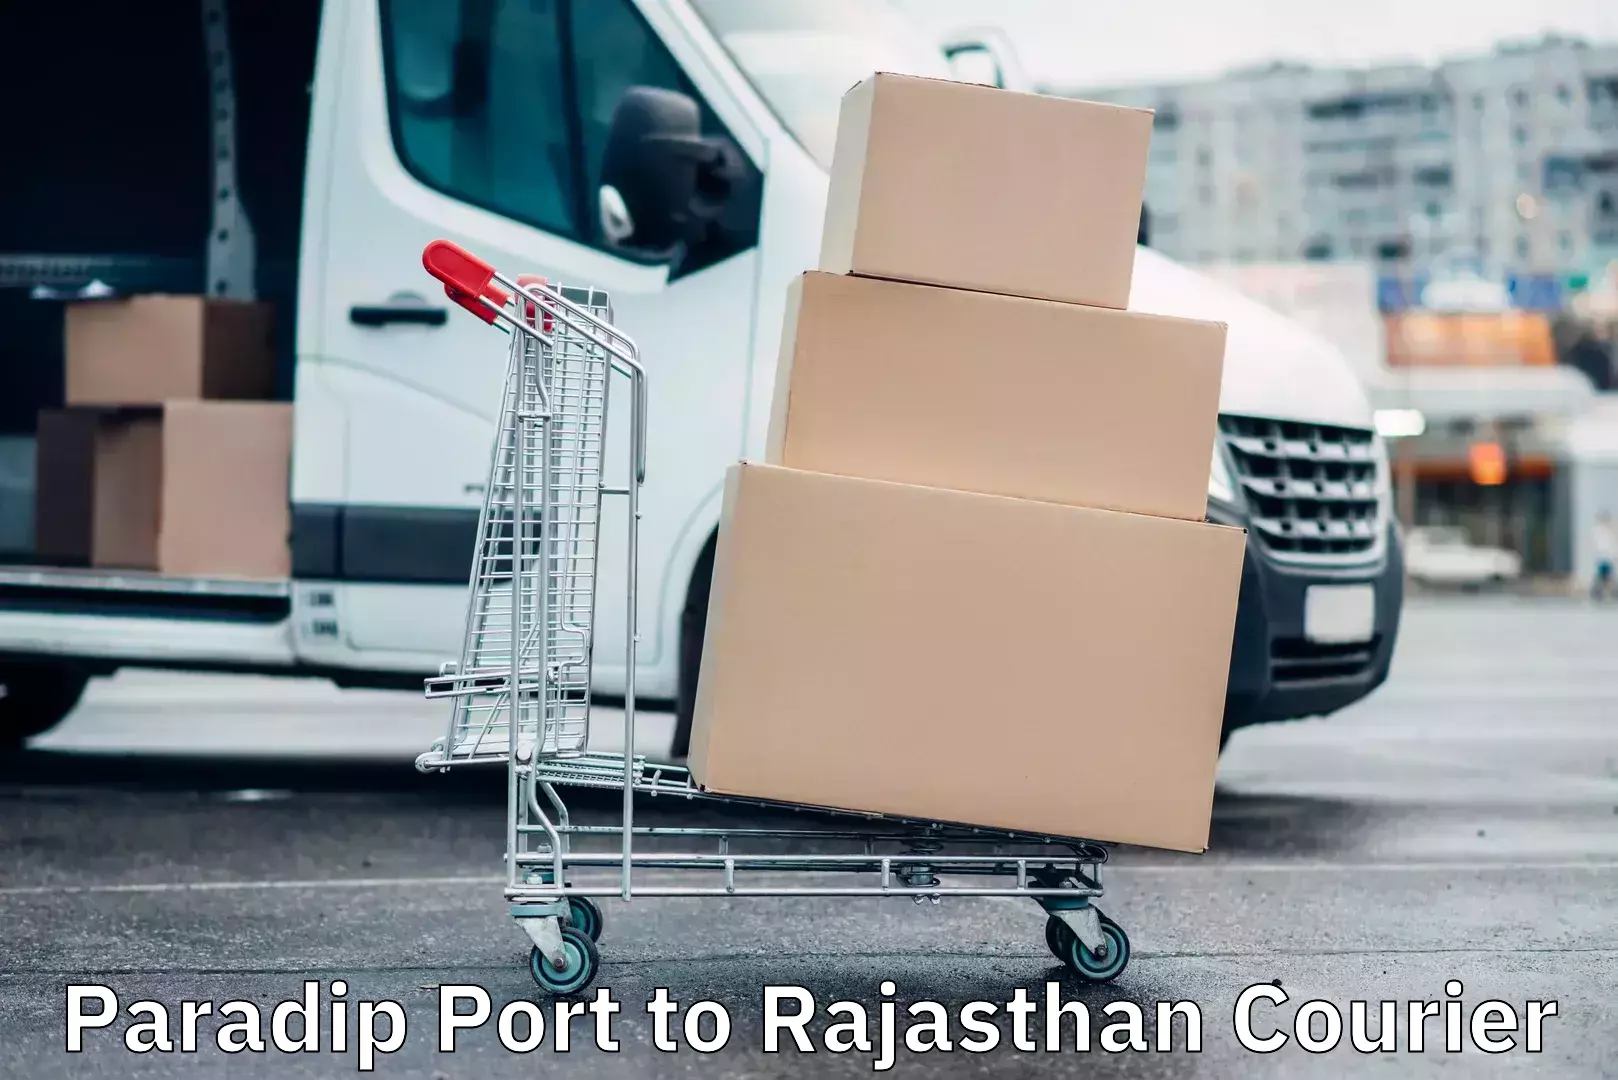 Cargo delivery service Paradip Port to Rajasthan